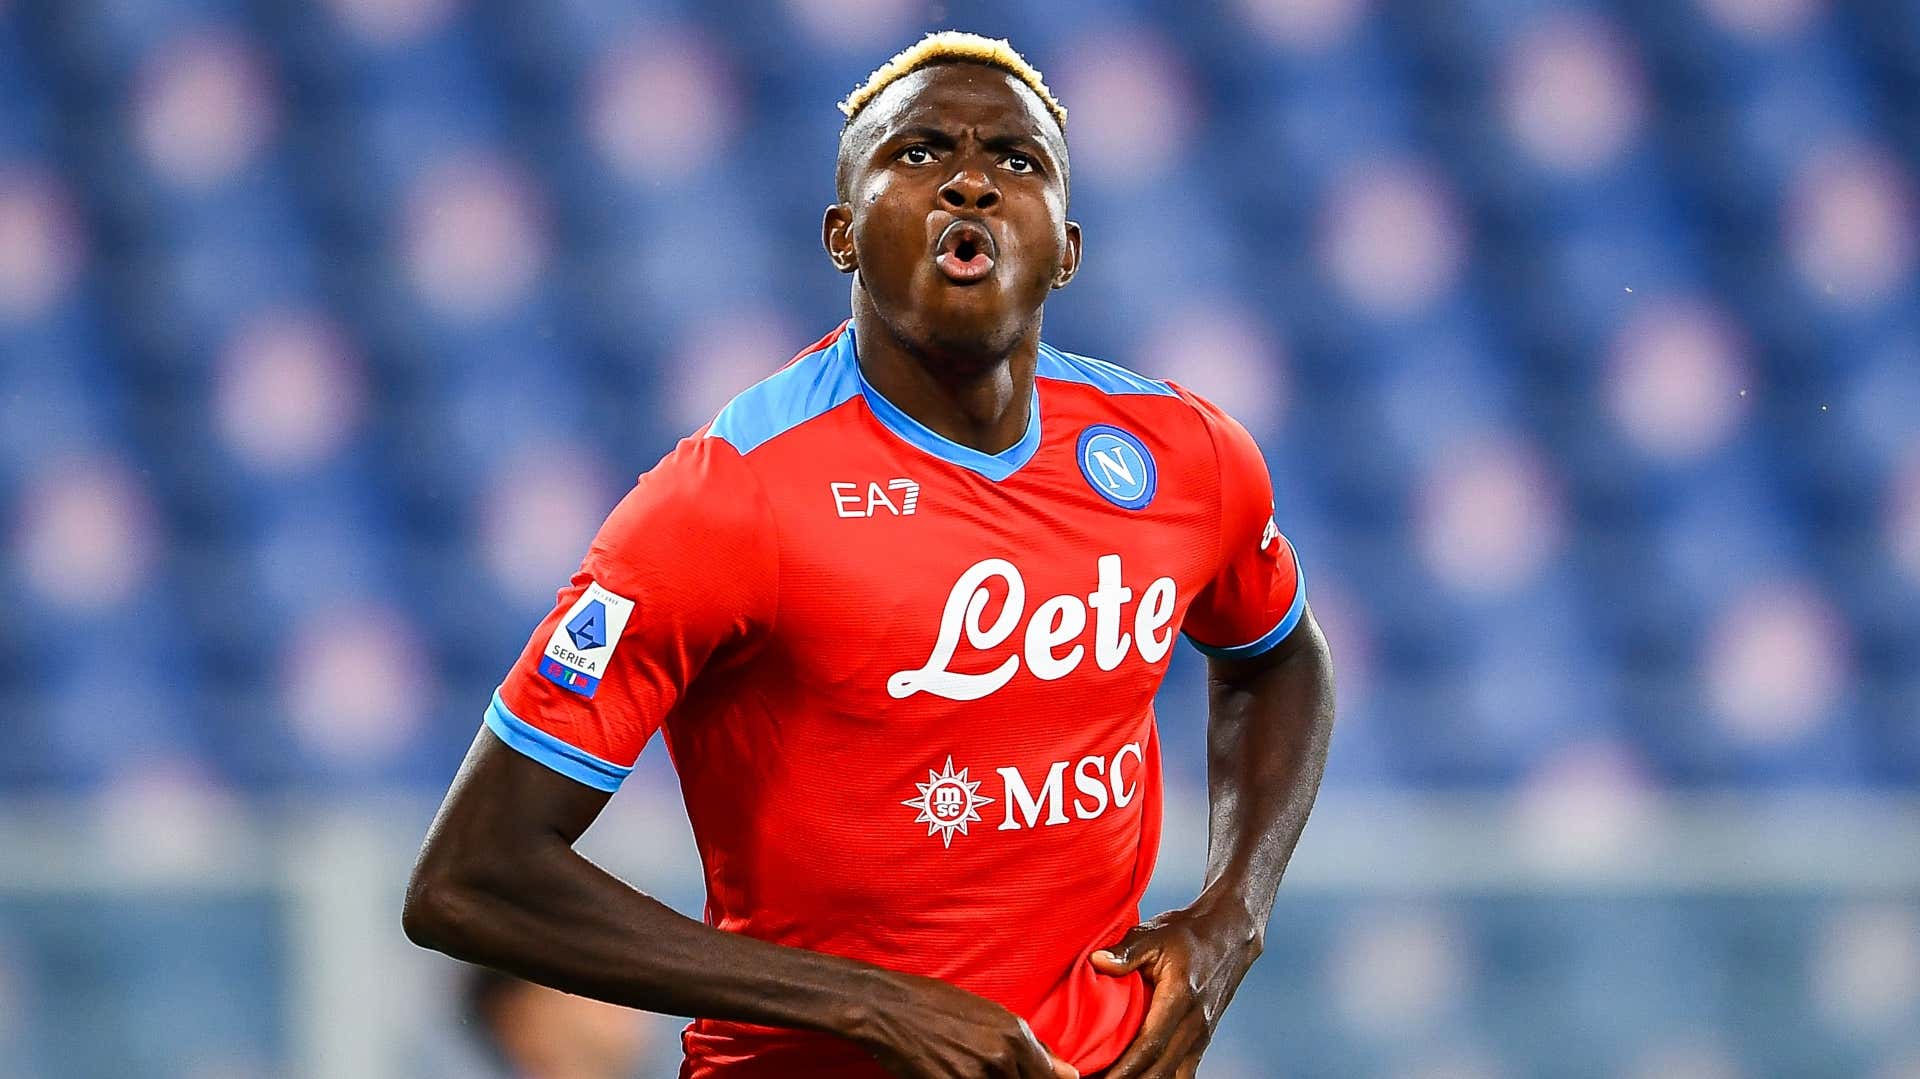 Napoli’s Osimhen knows how to hurt opponents in the box - Cannavaro